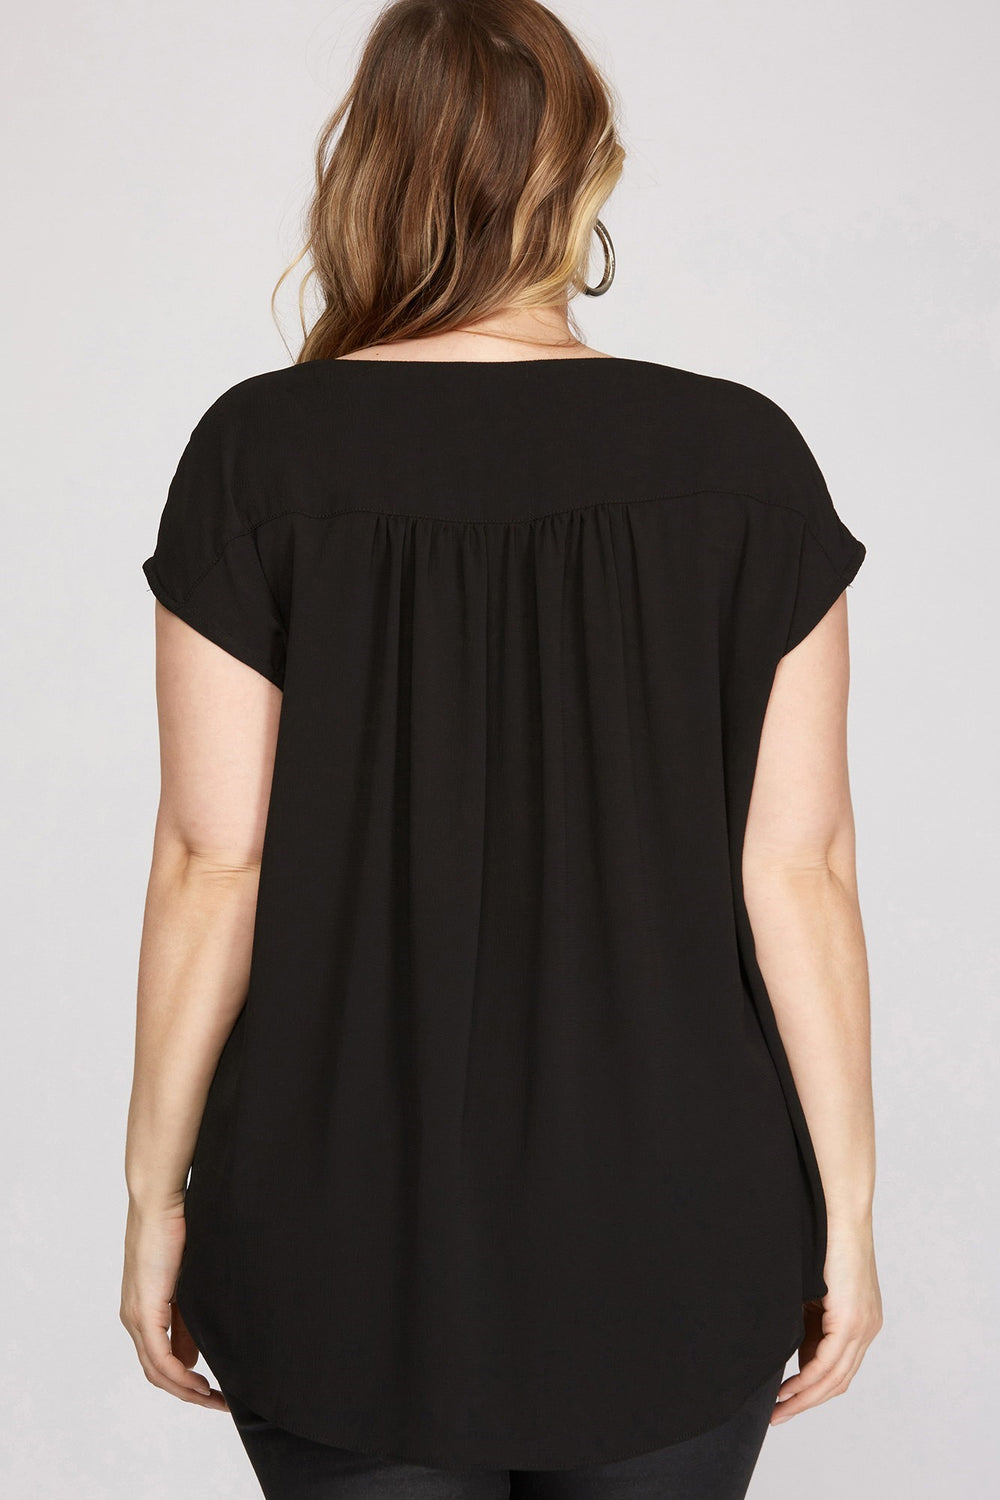 Kila Short Sleeve Surplice Top, Black-Short Sleeve Tops-Inspired by Justeen-Women's Clothing Boutique in Chicago, Illinois